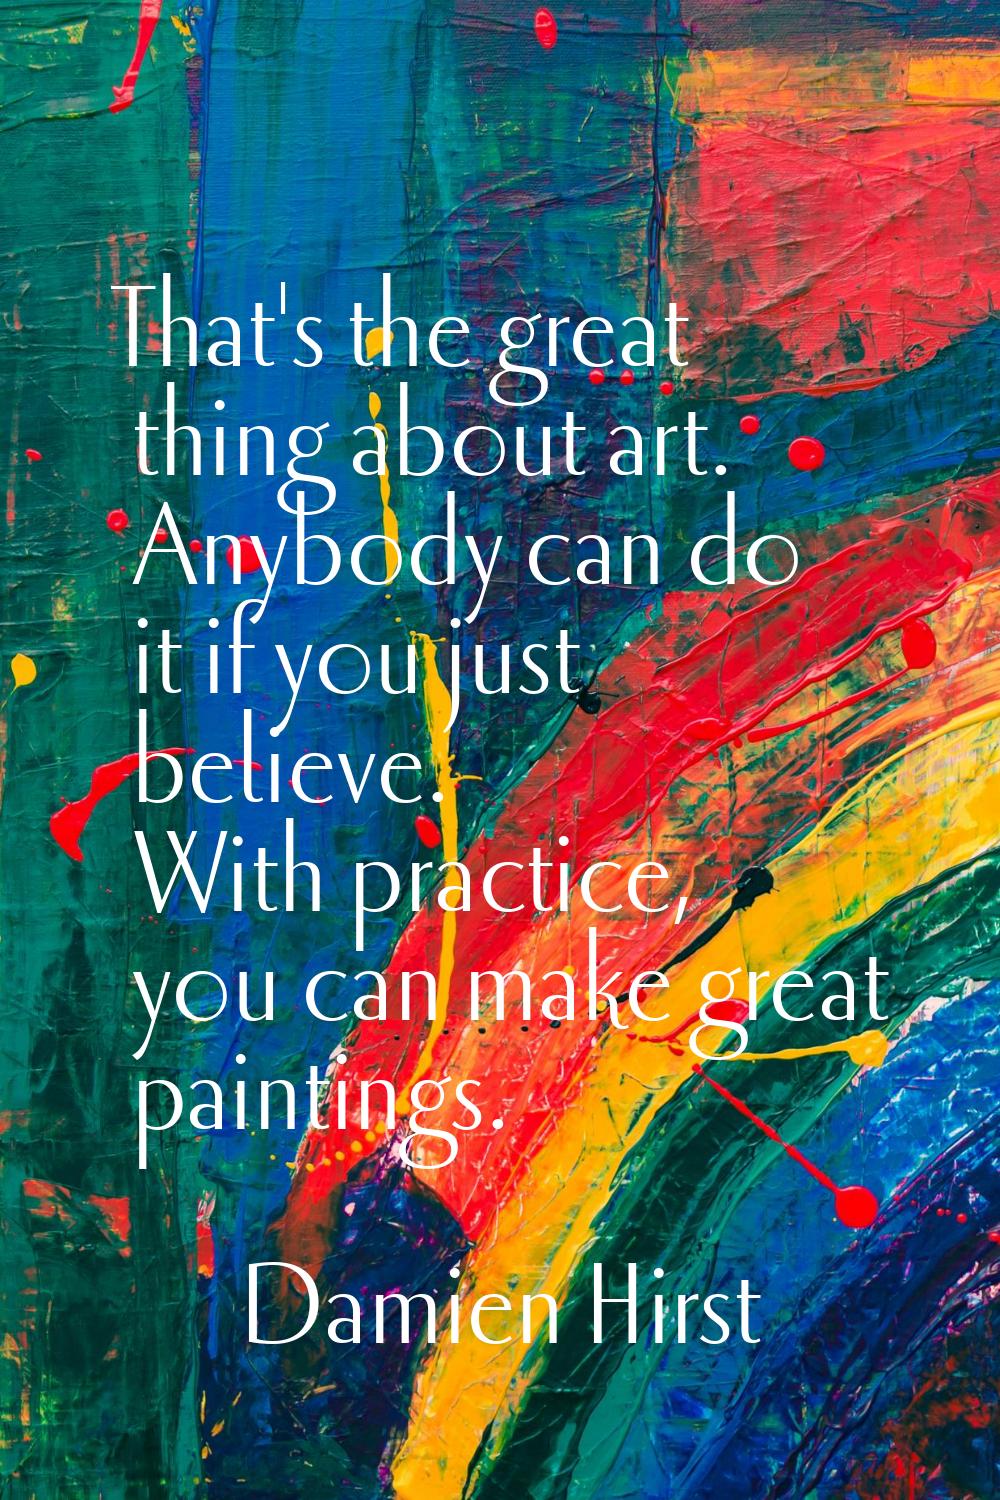 That's the great thing about art. Anybody can do it if you just believe. With practice, you can mak